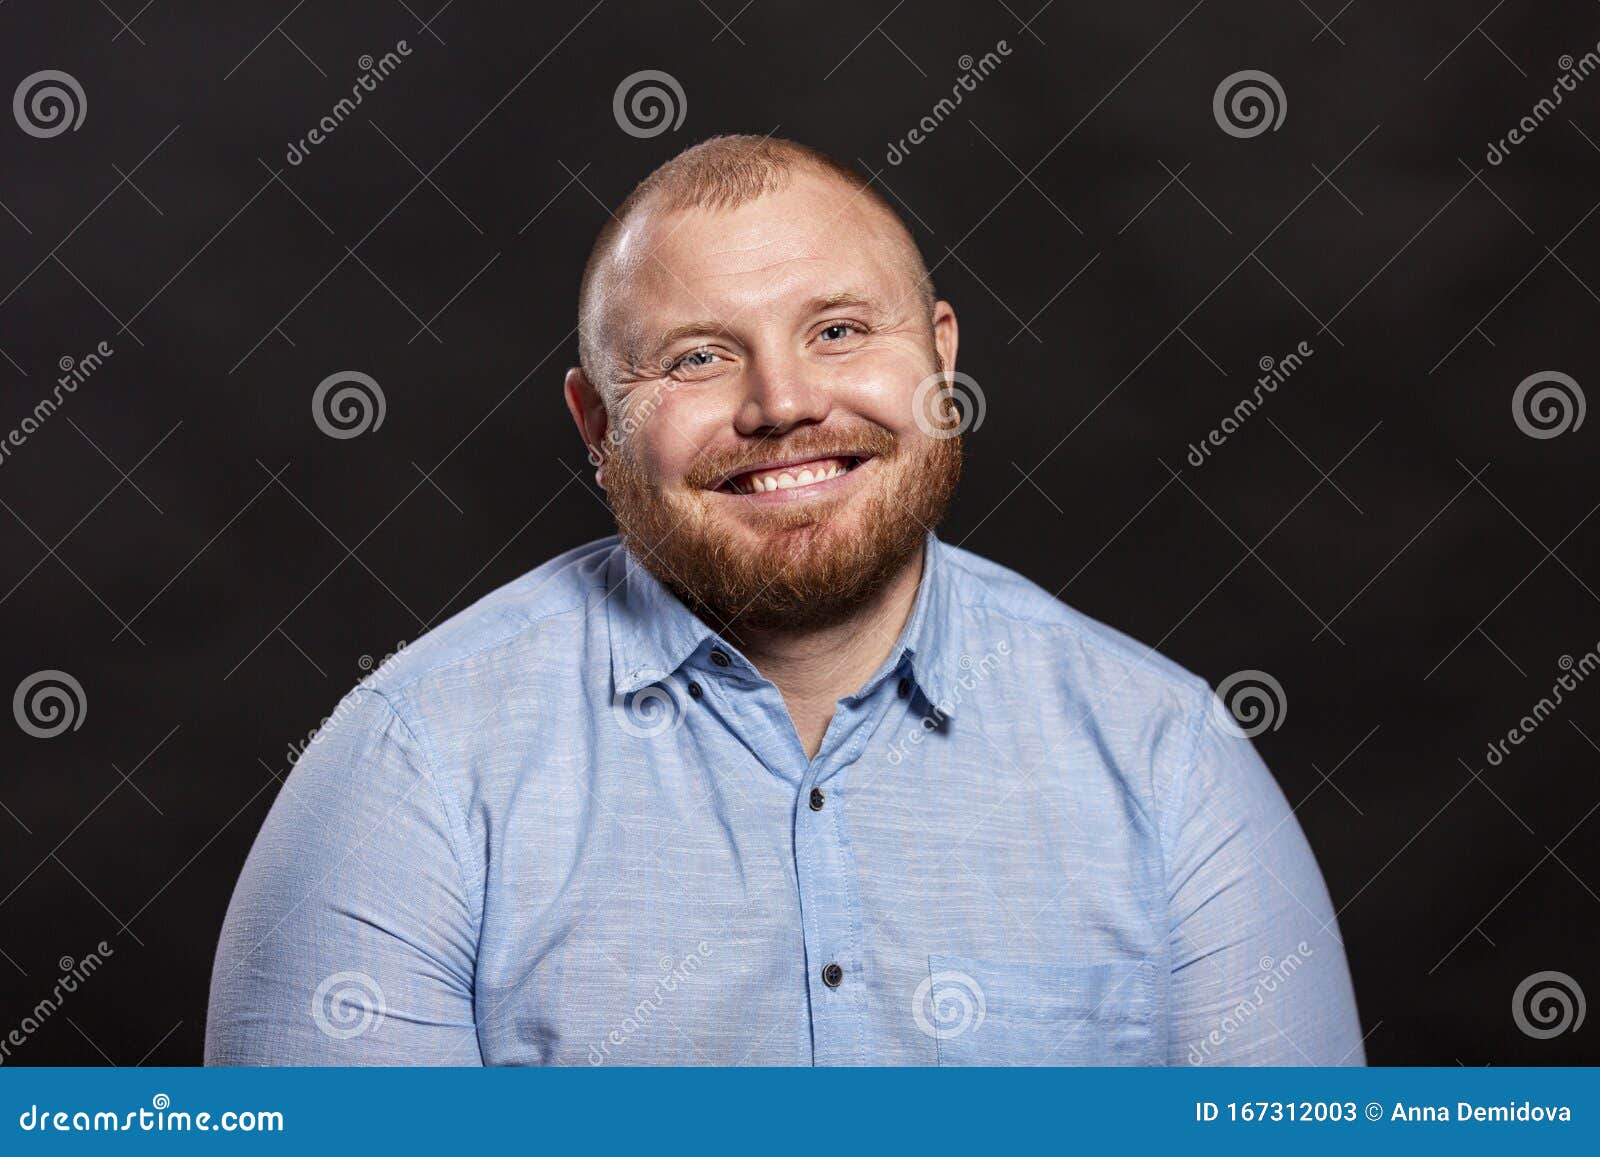 Laughing Fat Redhead Man With A Beard In A Blue Shirt Close Up Stock Image Image Of Closeup